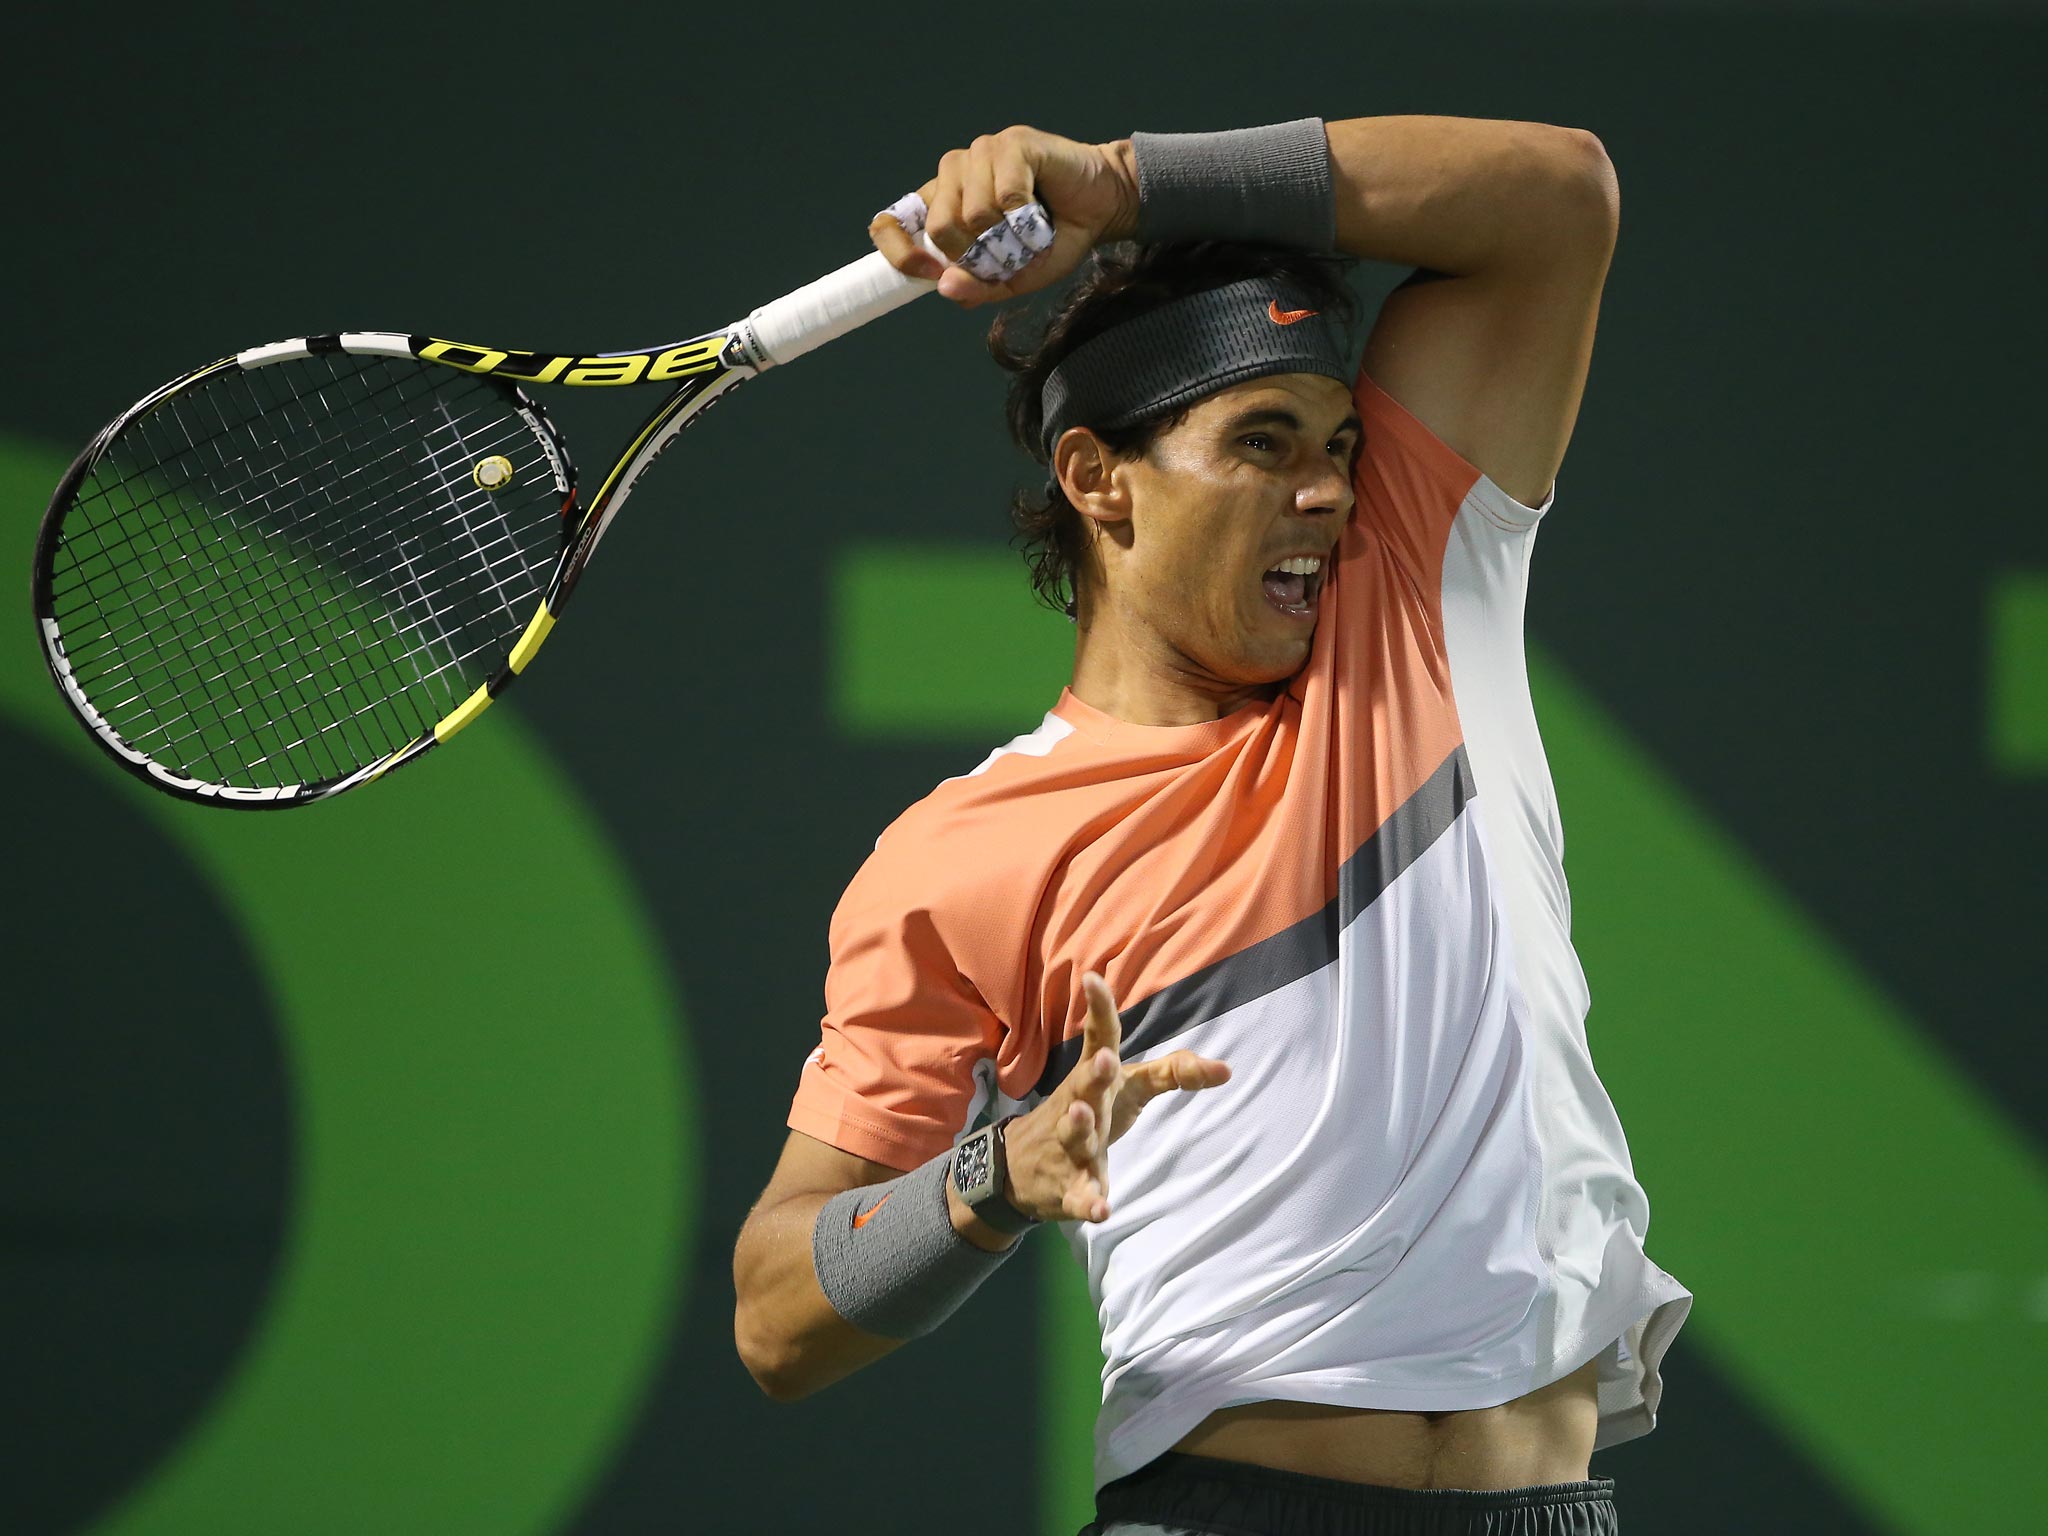 Rafael Nadal battled back from a set down to beat Milos Raonic and book his place in the Sony Open semi-finals